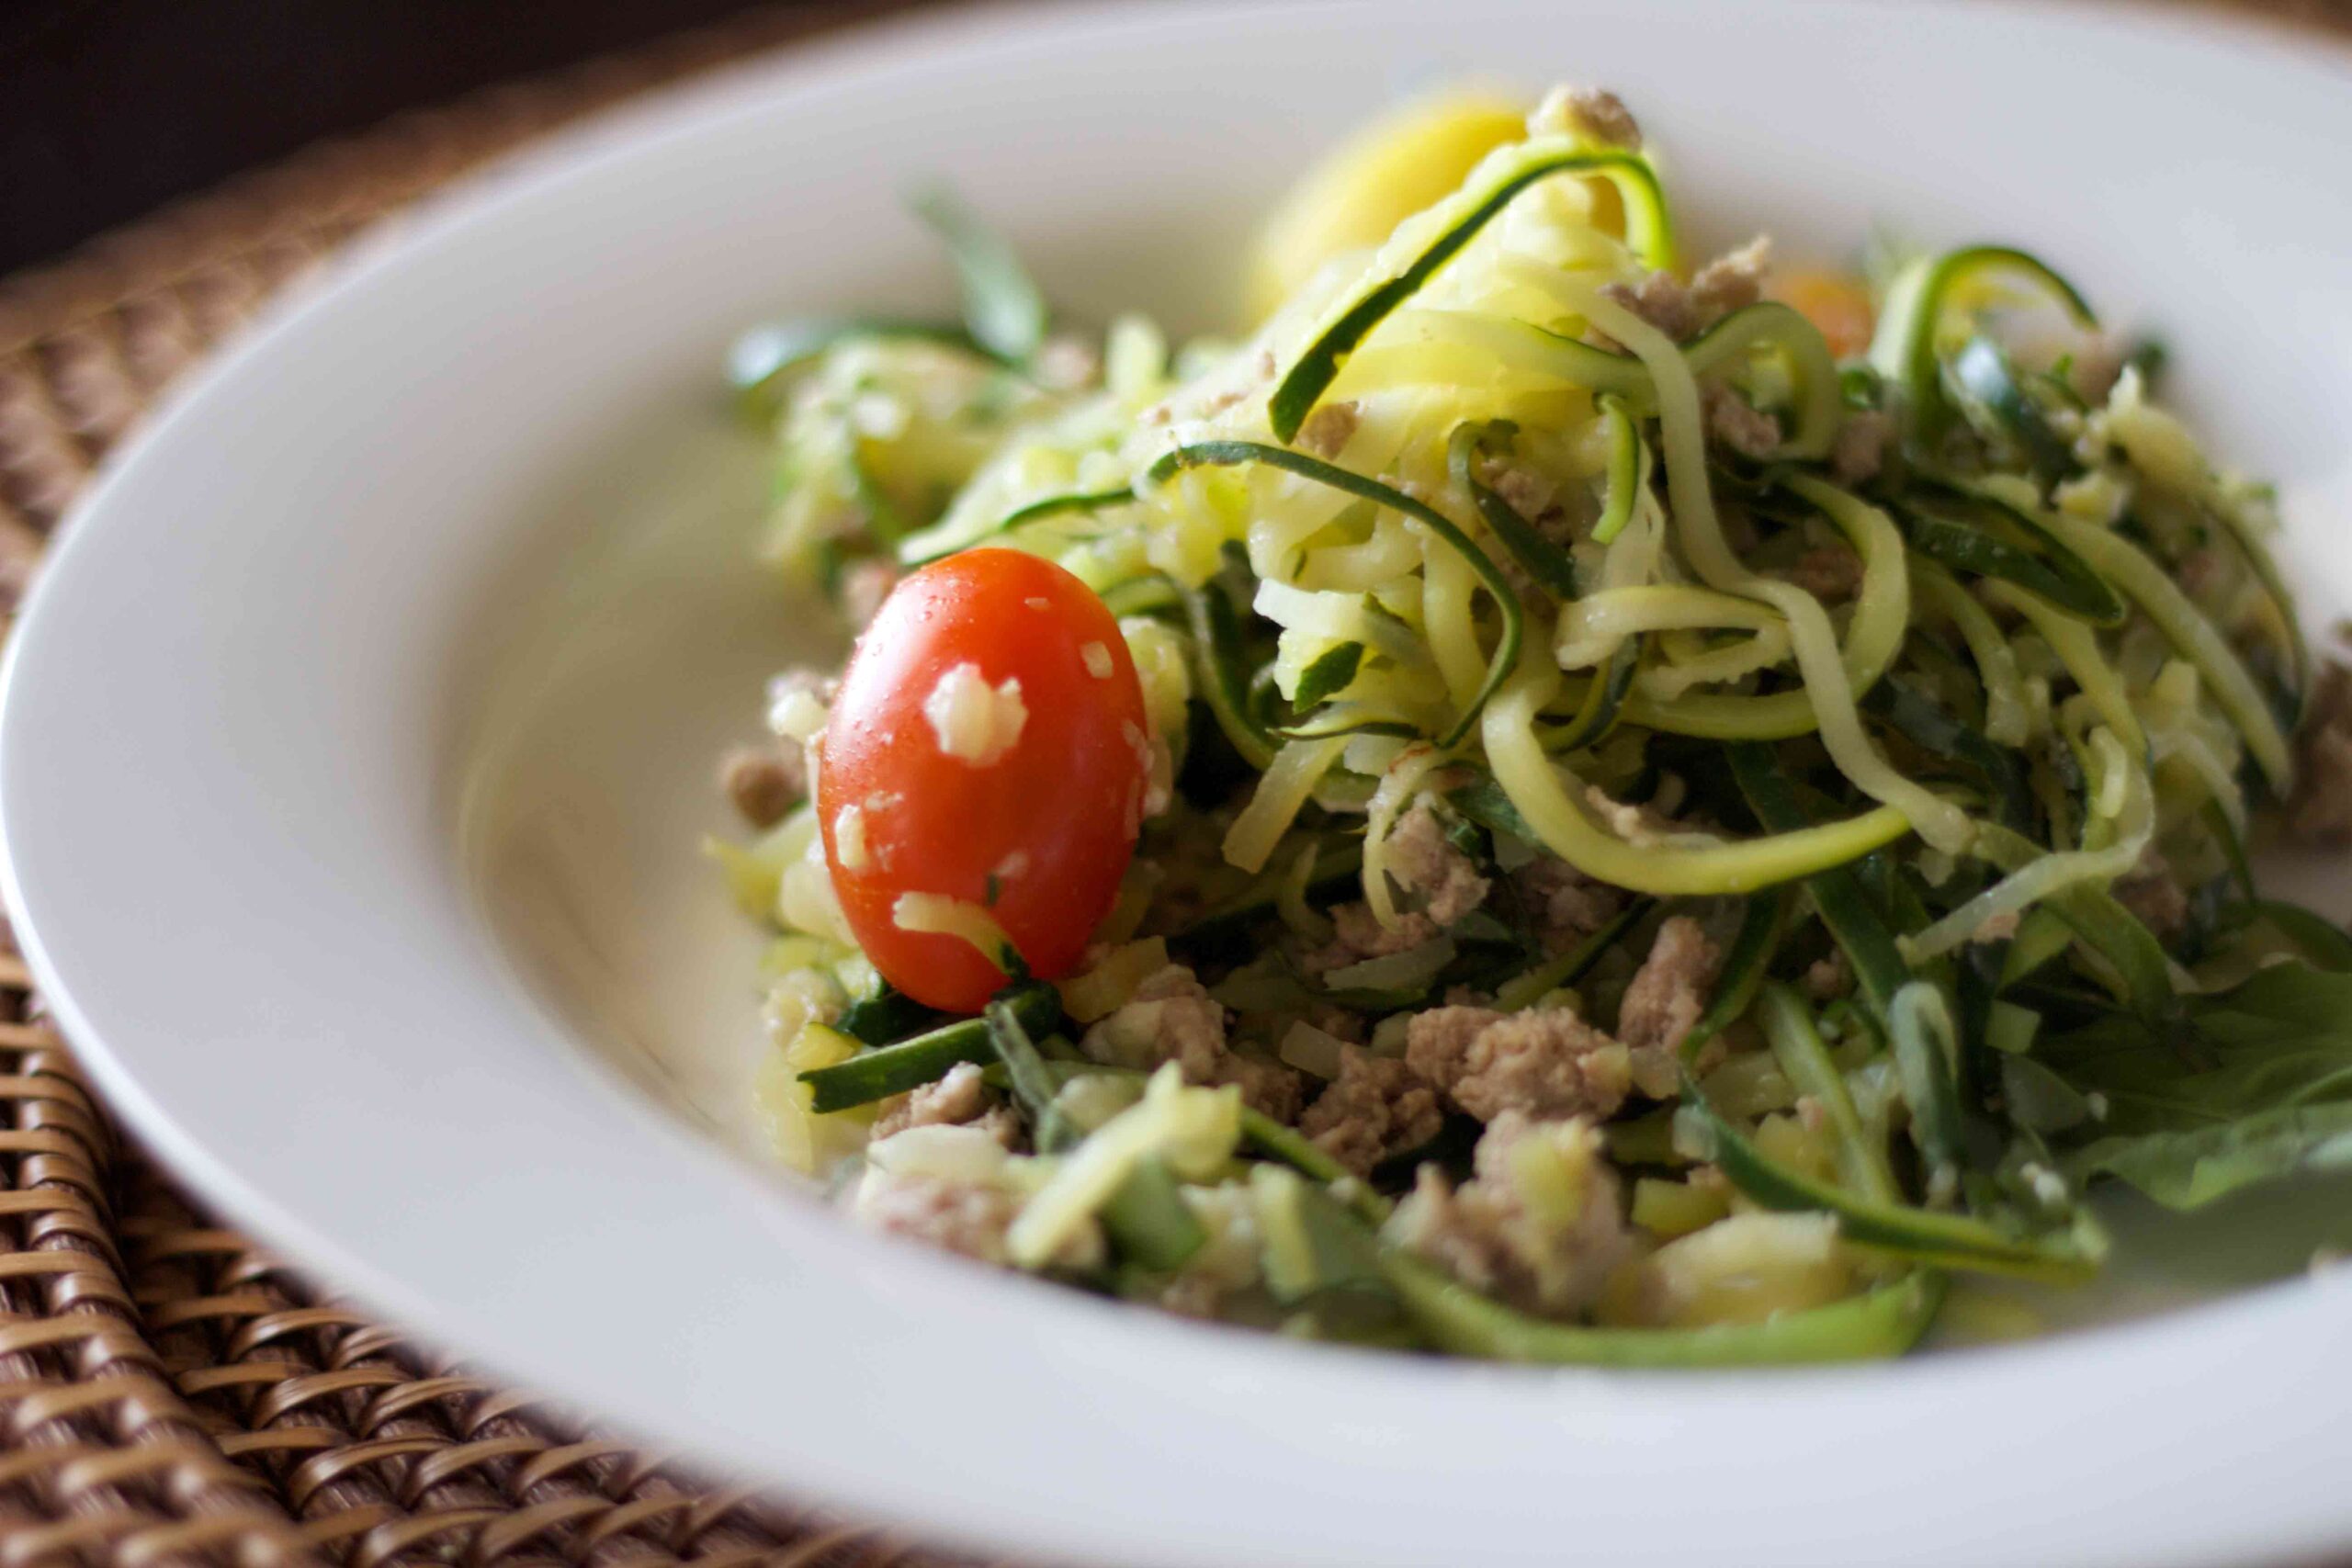 lemon zucchini pasta. low carb and bariatric friendly!